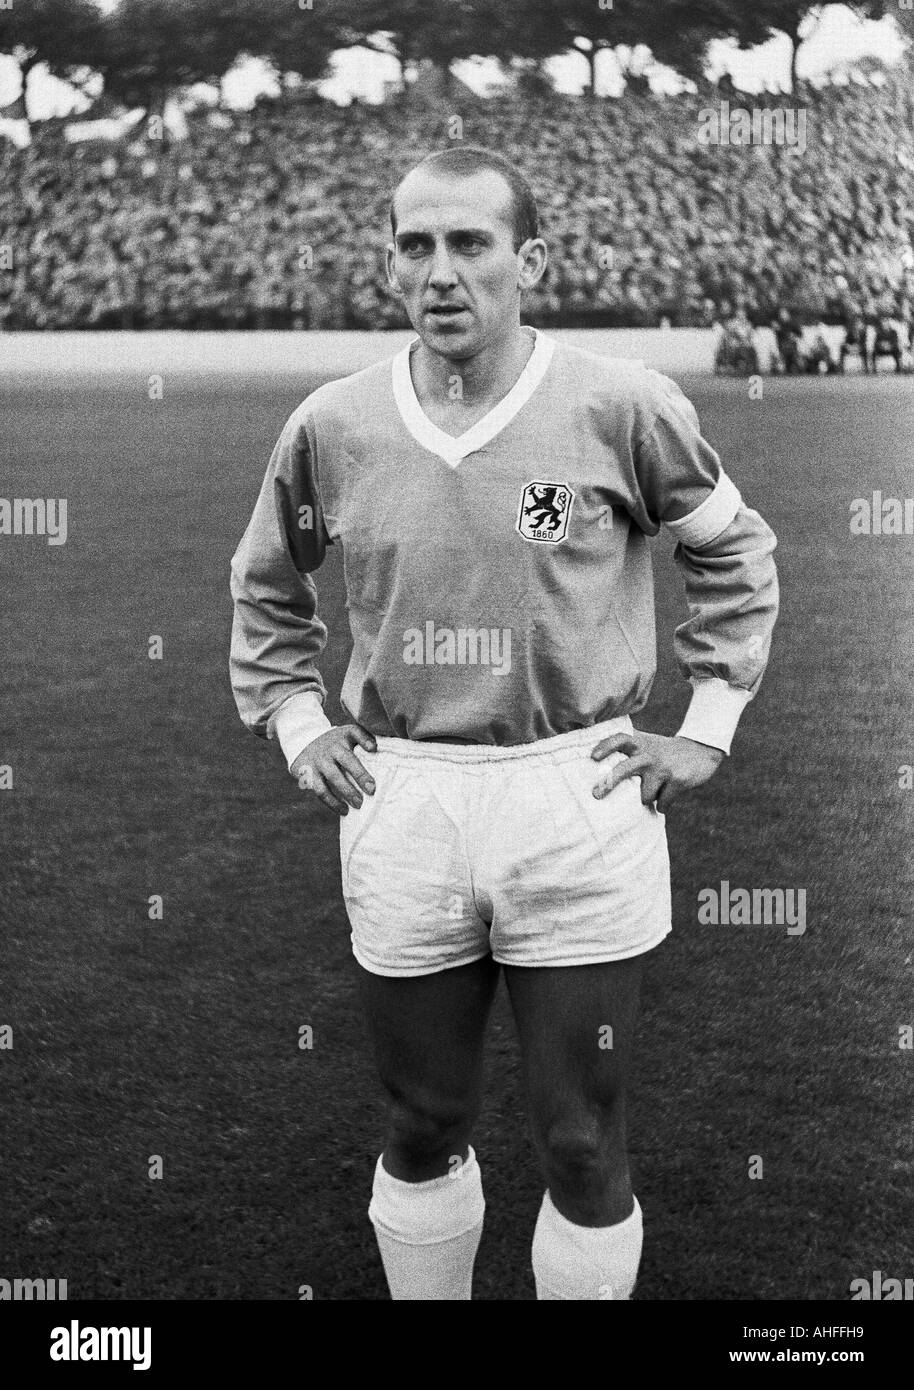 1860 munich 1965 hi-res stock photography and images - Alamy